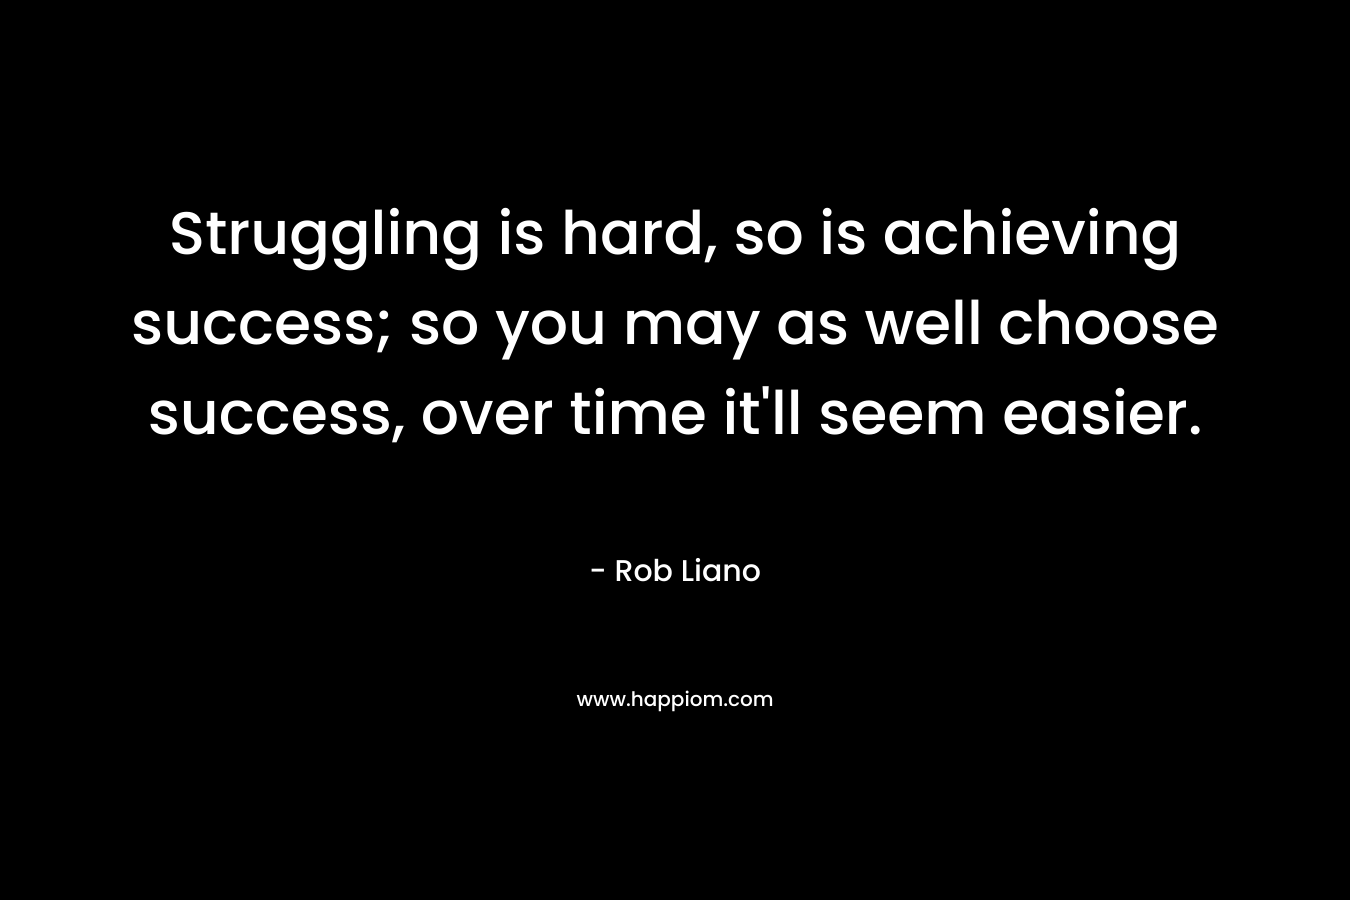 Struggling is hard, so is achieving success; so you may as well choose success, over time it’ll seem easier. – Rob Liano